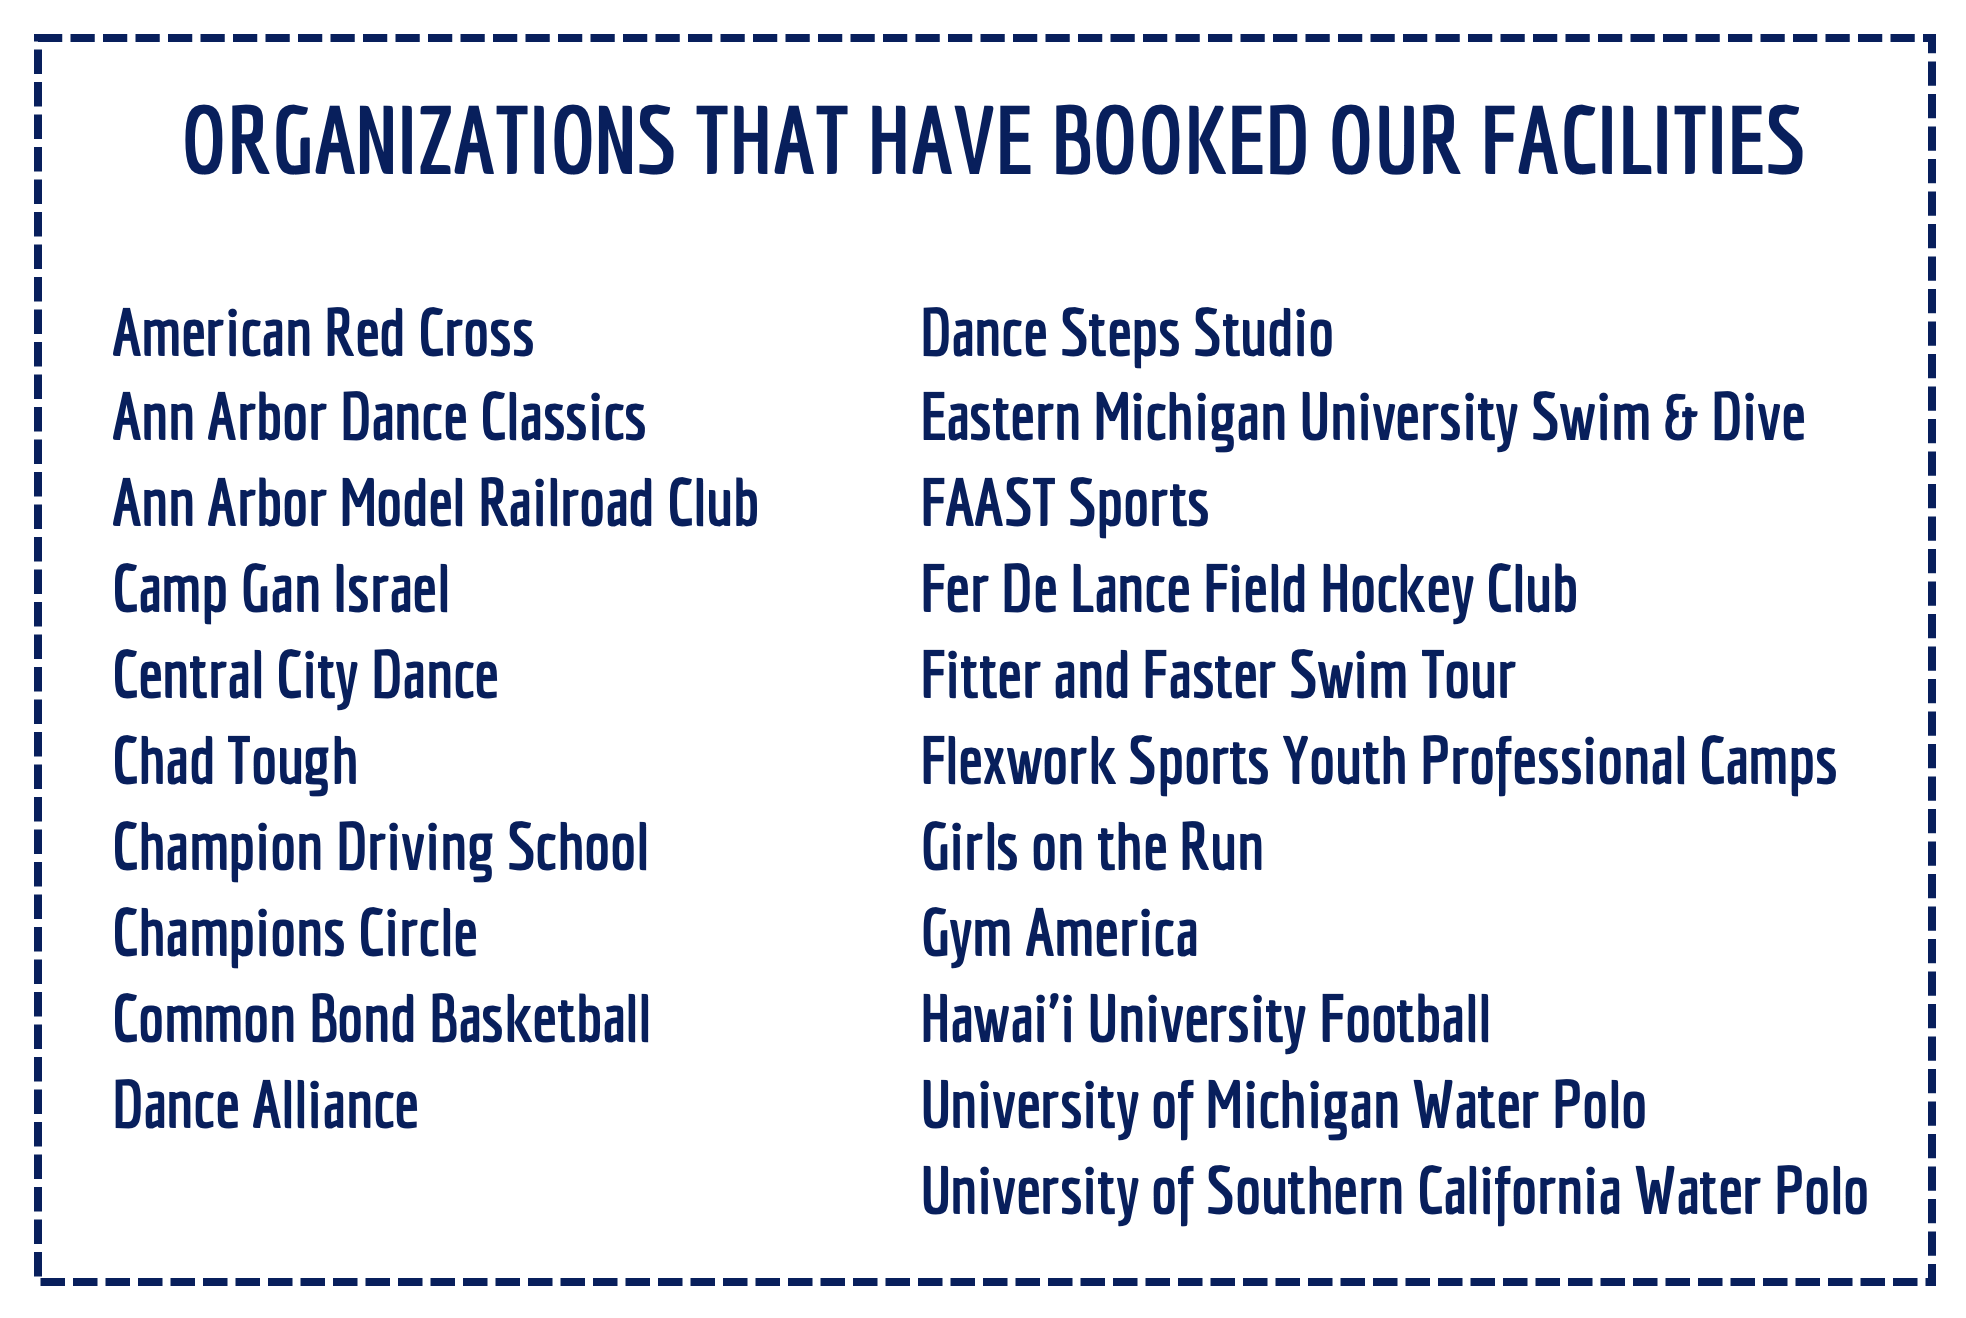 Organizations that booked our facilities.